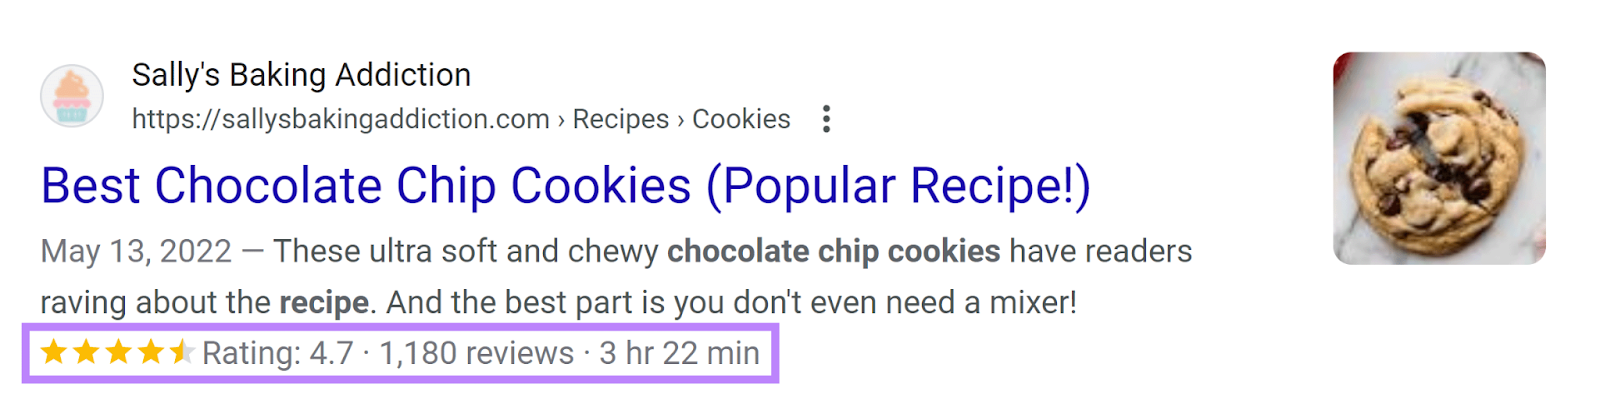 Search result for cookie recipe with recipe rich snippet highlighted.